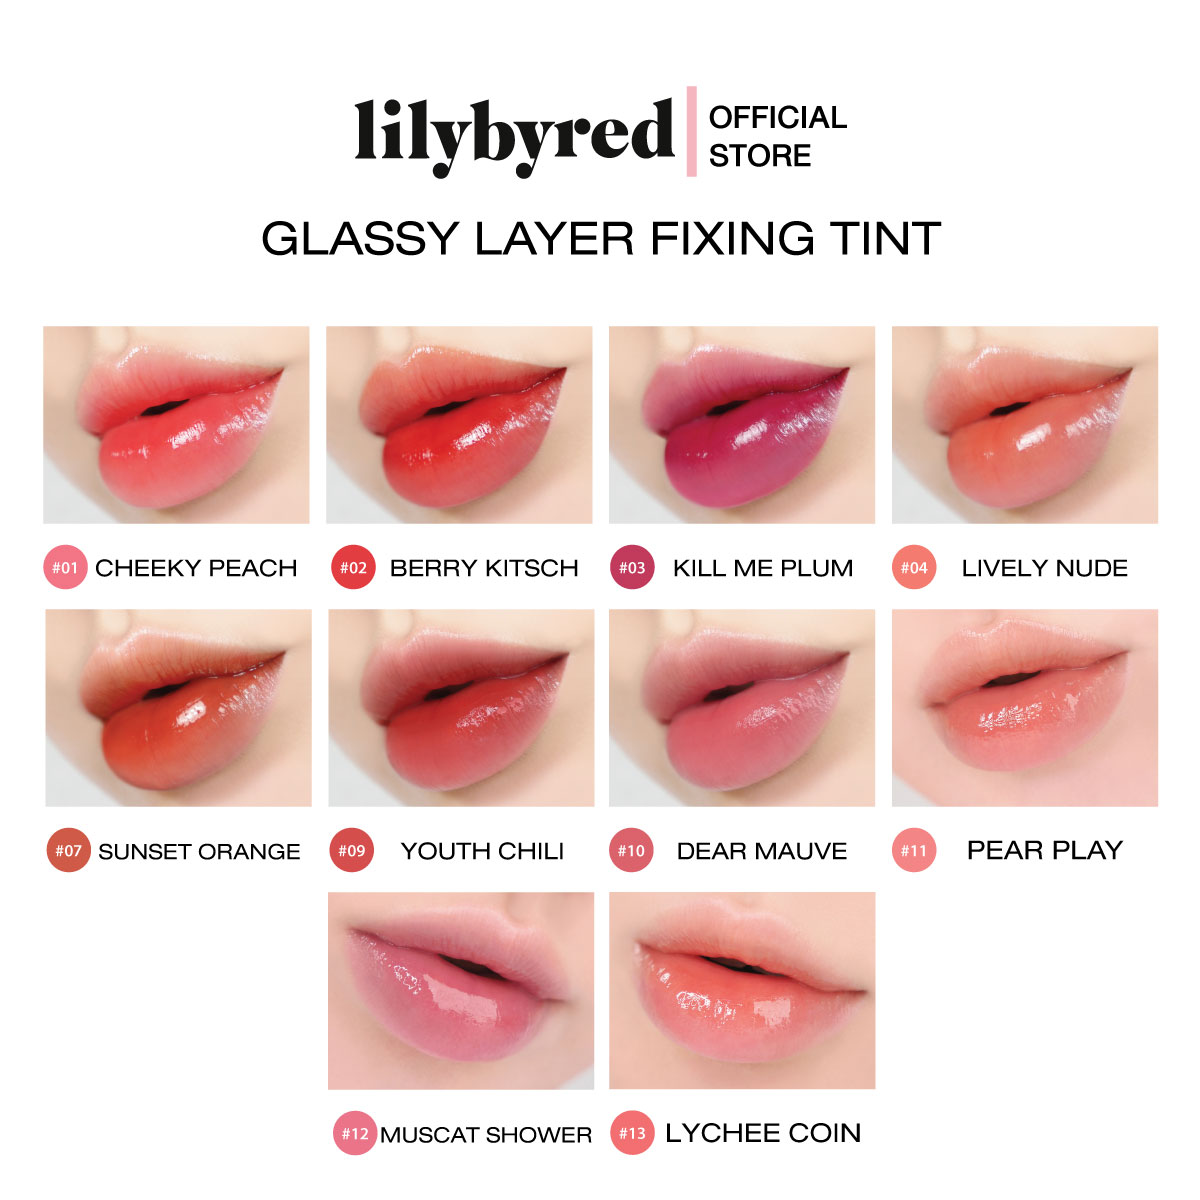 Lilybyred Glassy Layer Fixing Tint #09 Youth Chili 3.8 g ,Lilybyred Glassy Layer Fixing Tint #09 Youth Chili ,Lilybyred Glassy Layer Fixing Tint #09 ,Lilybyred Glassy Layer Fixing Tint สีใหม่ ,Lilybyred Glassy Layer Fixing Tint #09 รีวิว ,